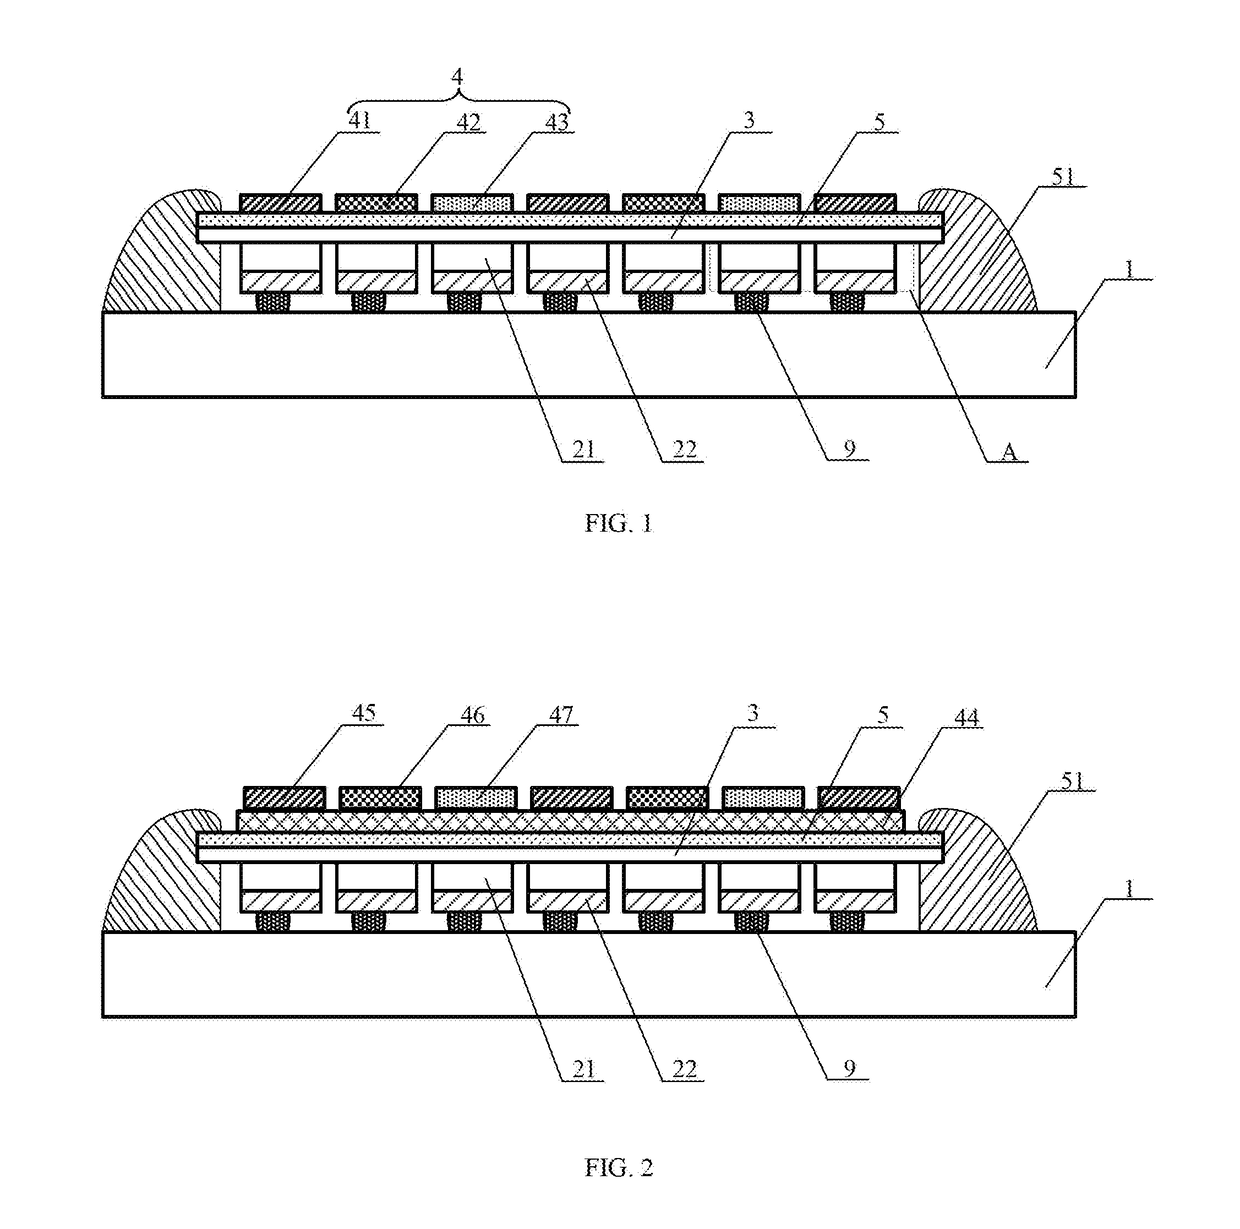 Semiconductor LED Display Devices